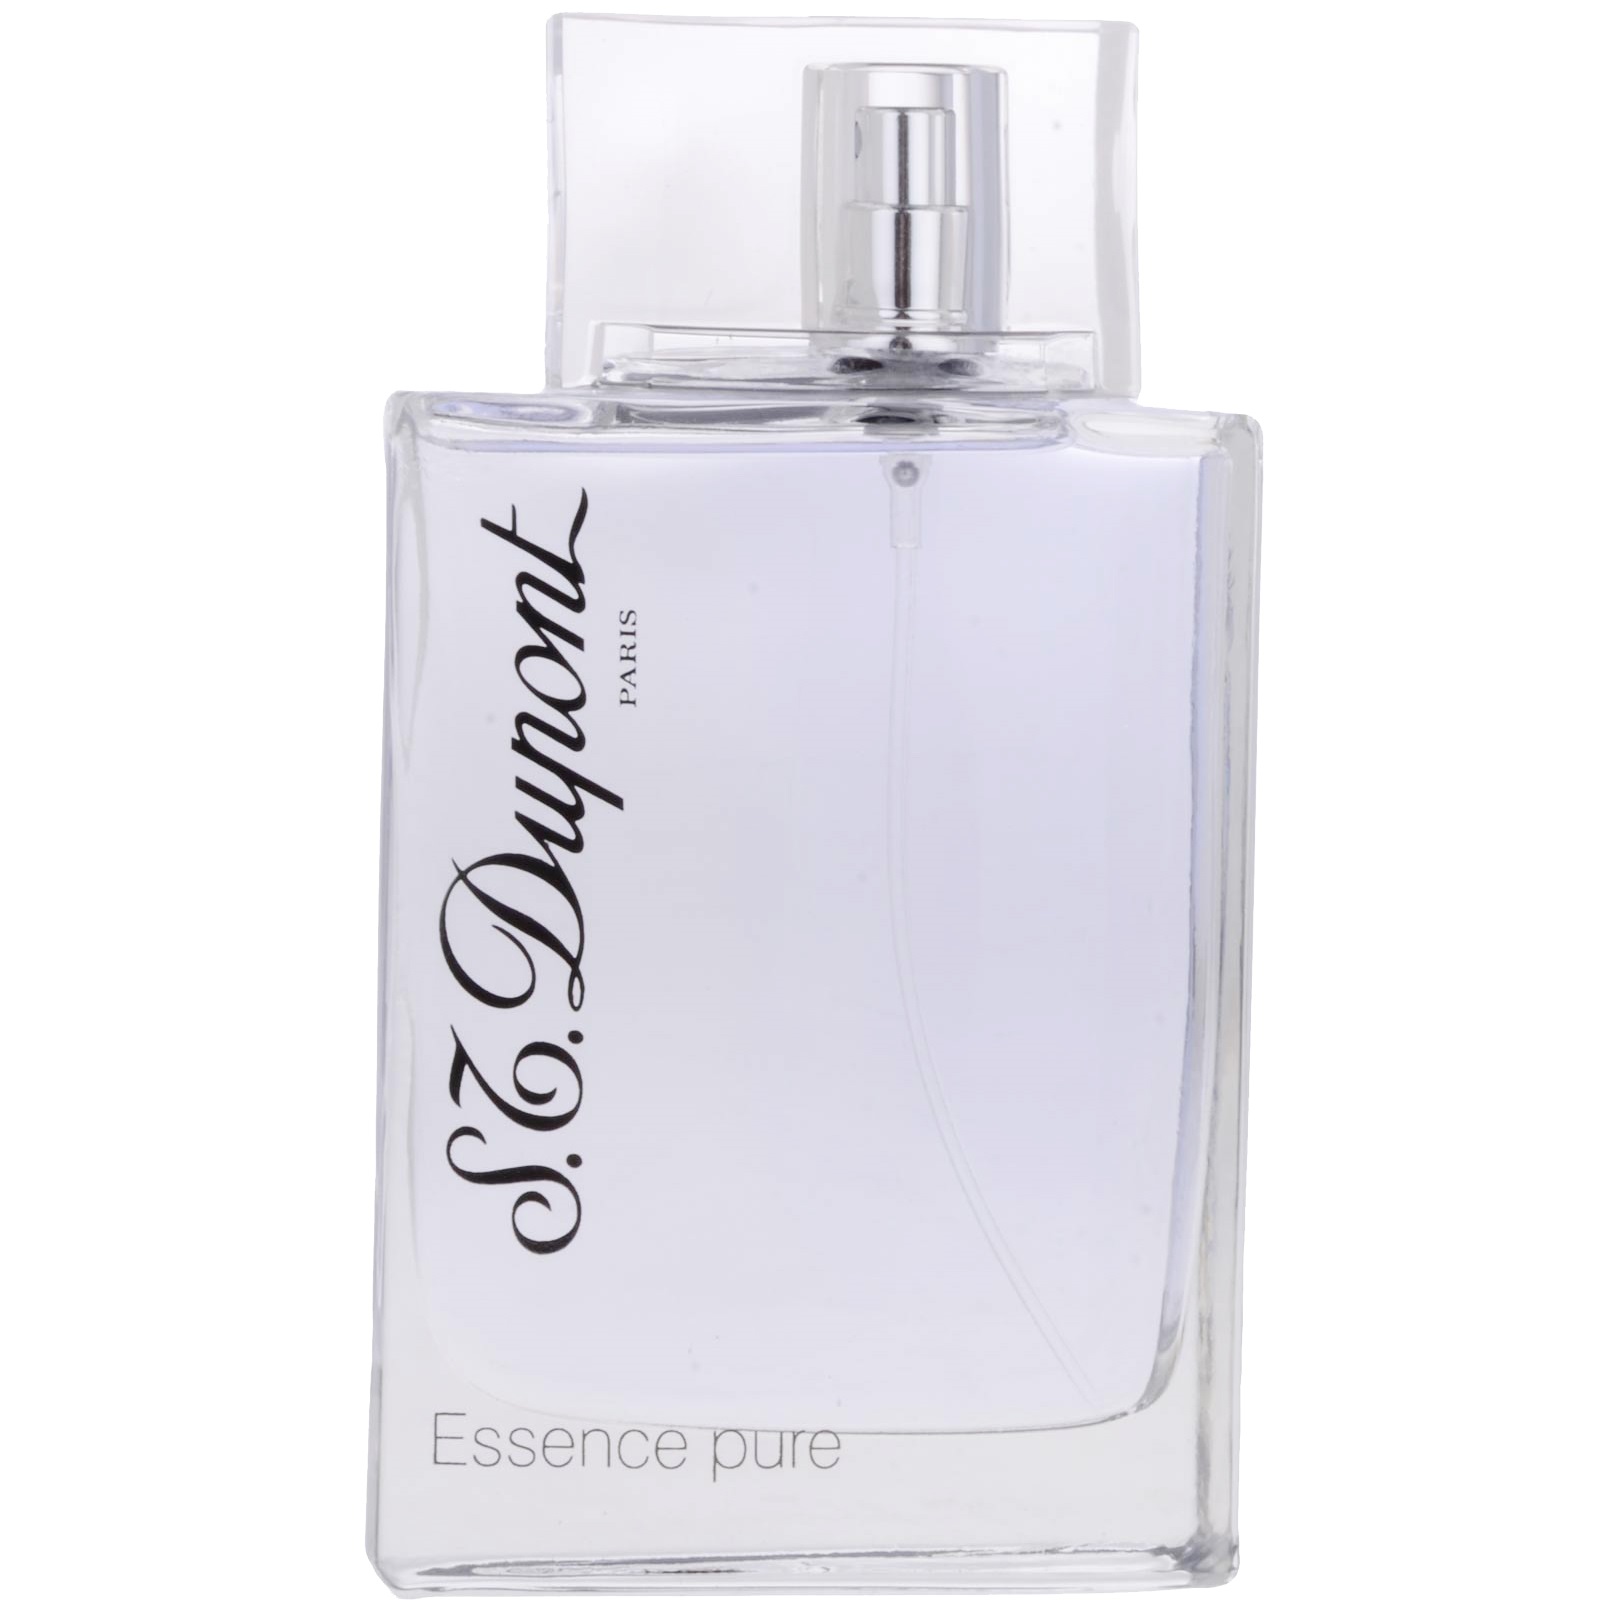 Dupont homme. S.T.Dupont Essence Pure 100ml EDT. S.T.Dupont Essence Pure men 100ml EDT Test. Dupont Essence Pure Lady 100ml EDT. Дюпон Essence Pure мужской.